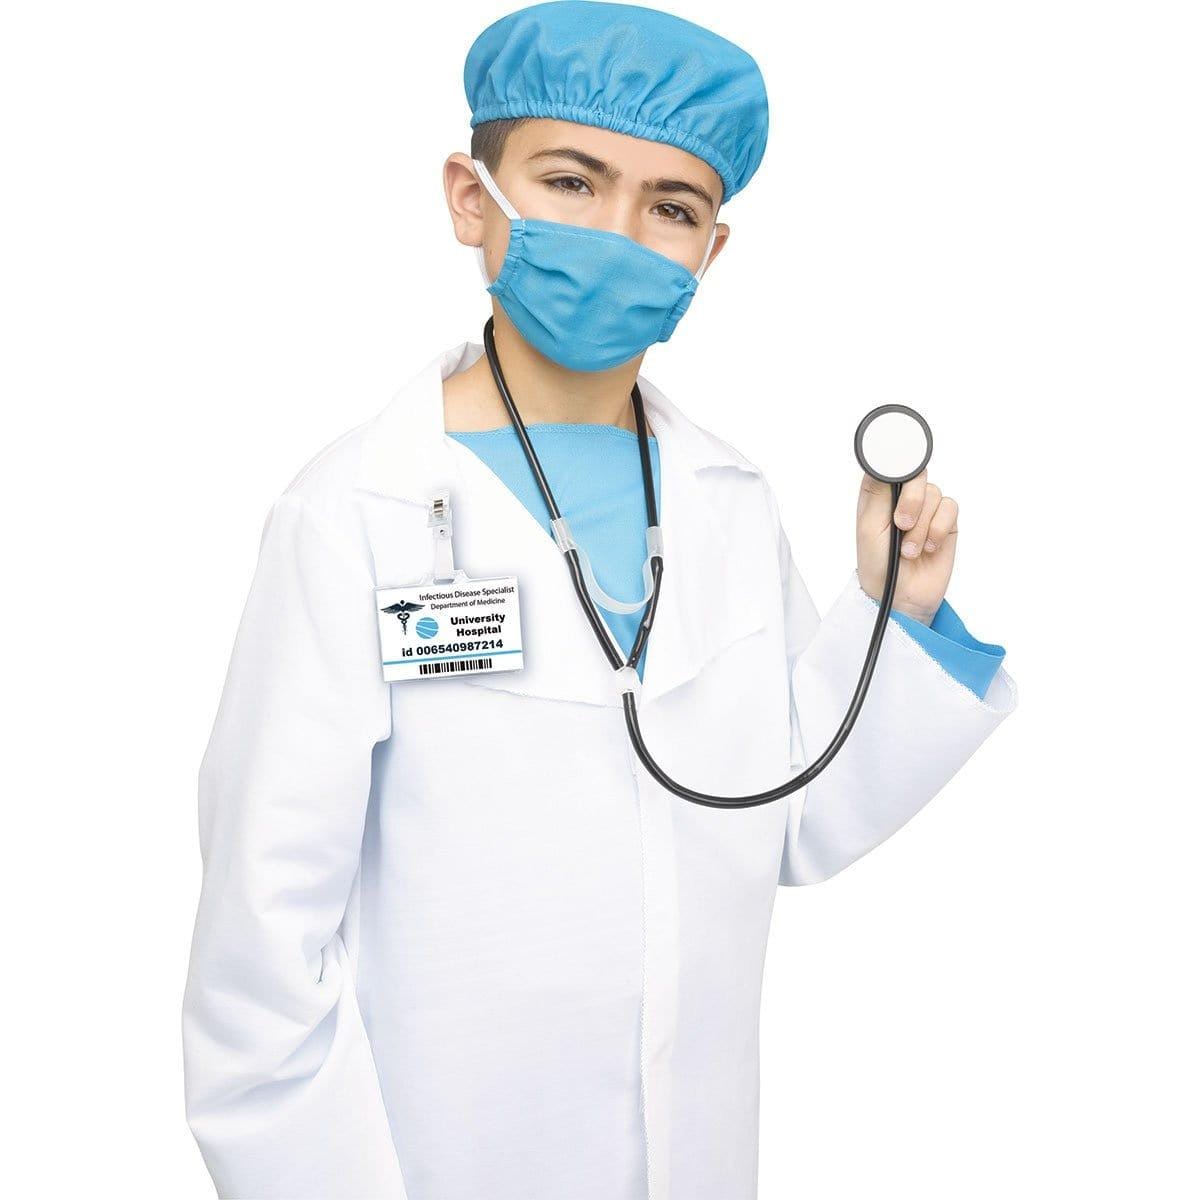 Buy Costume Accessories Doctor Medical Kit for Kids sold at Party Expert